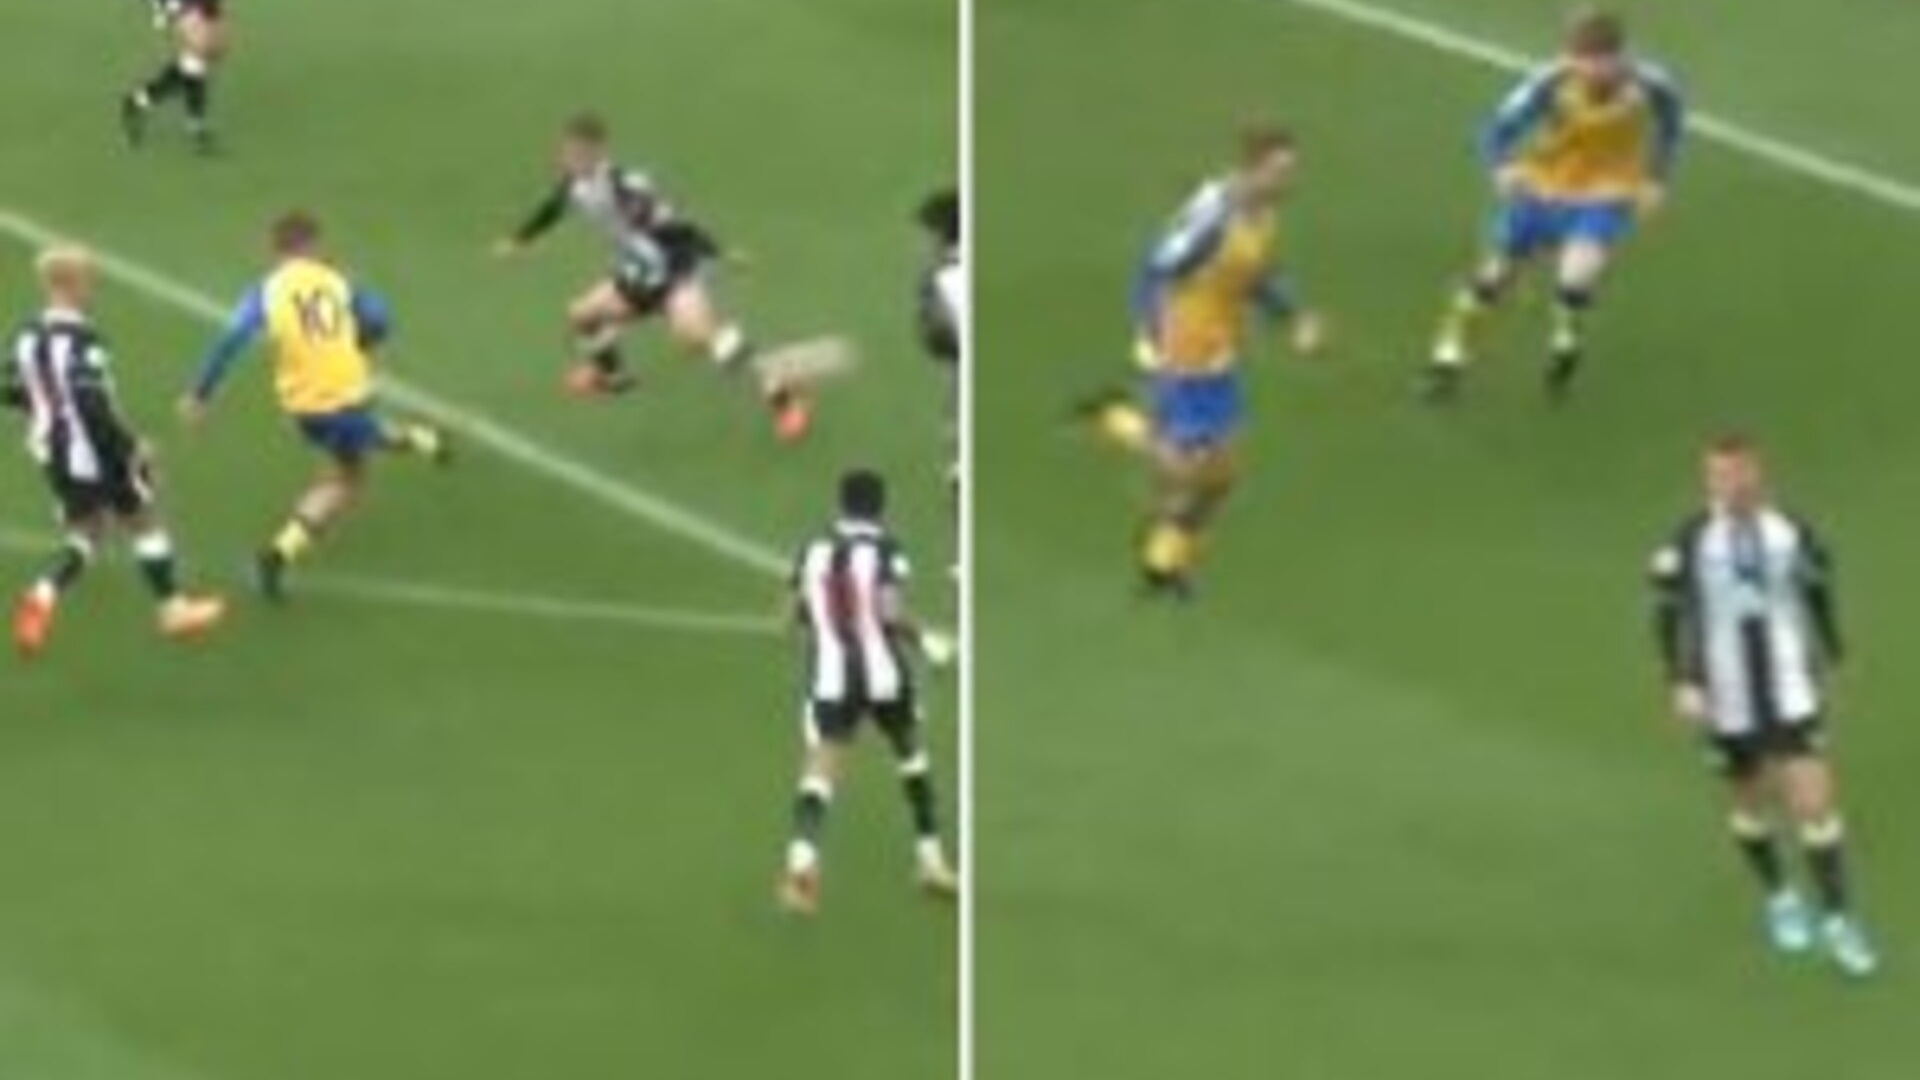 Watch Southampton youngster  Dibling, 16, score hat-trick of identical goals